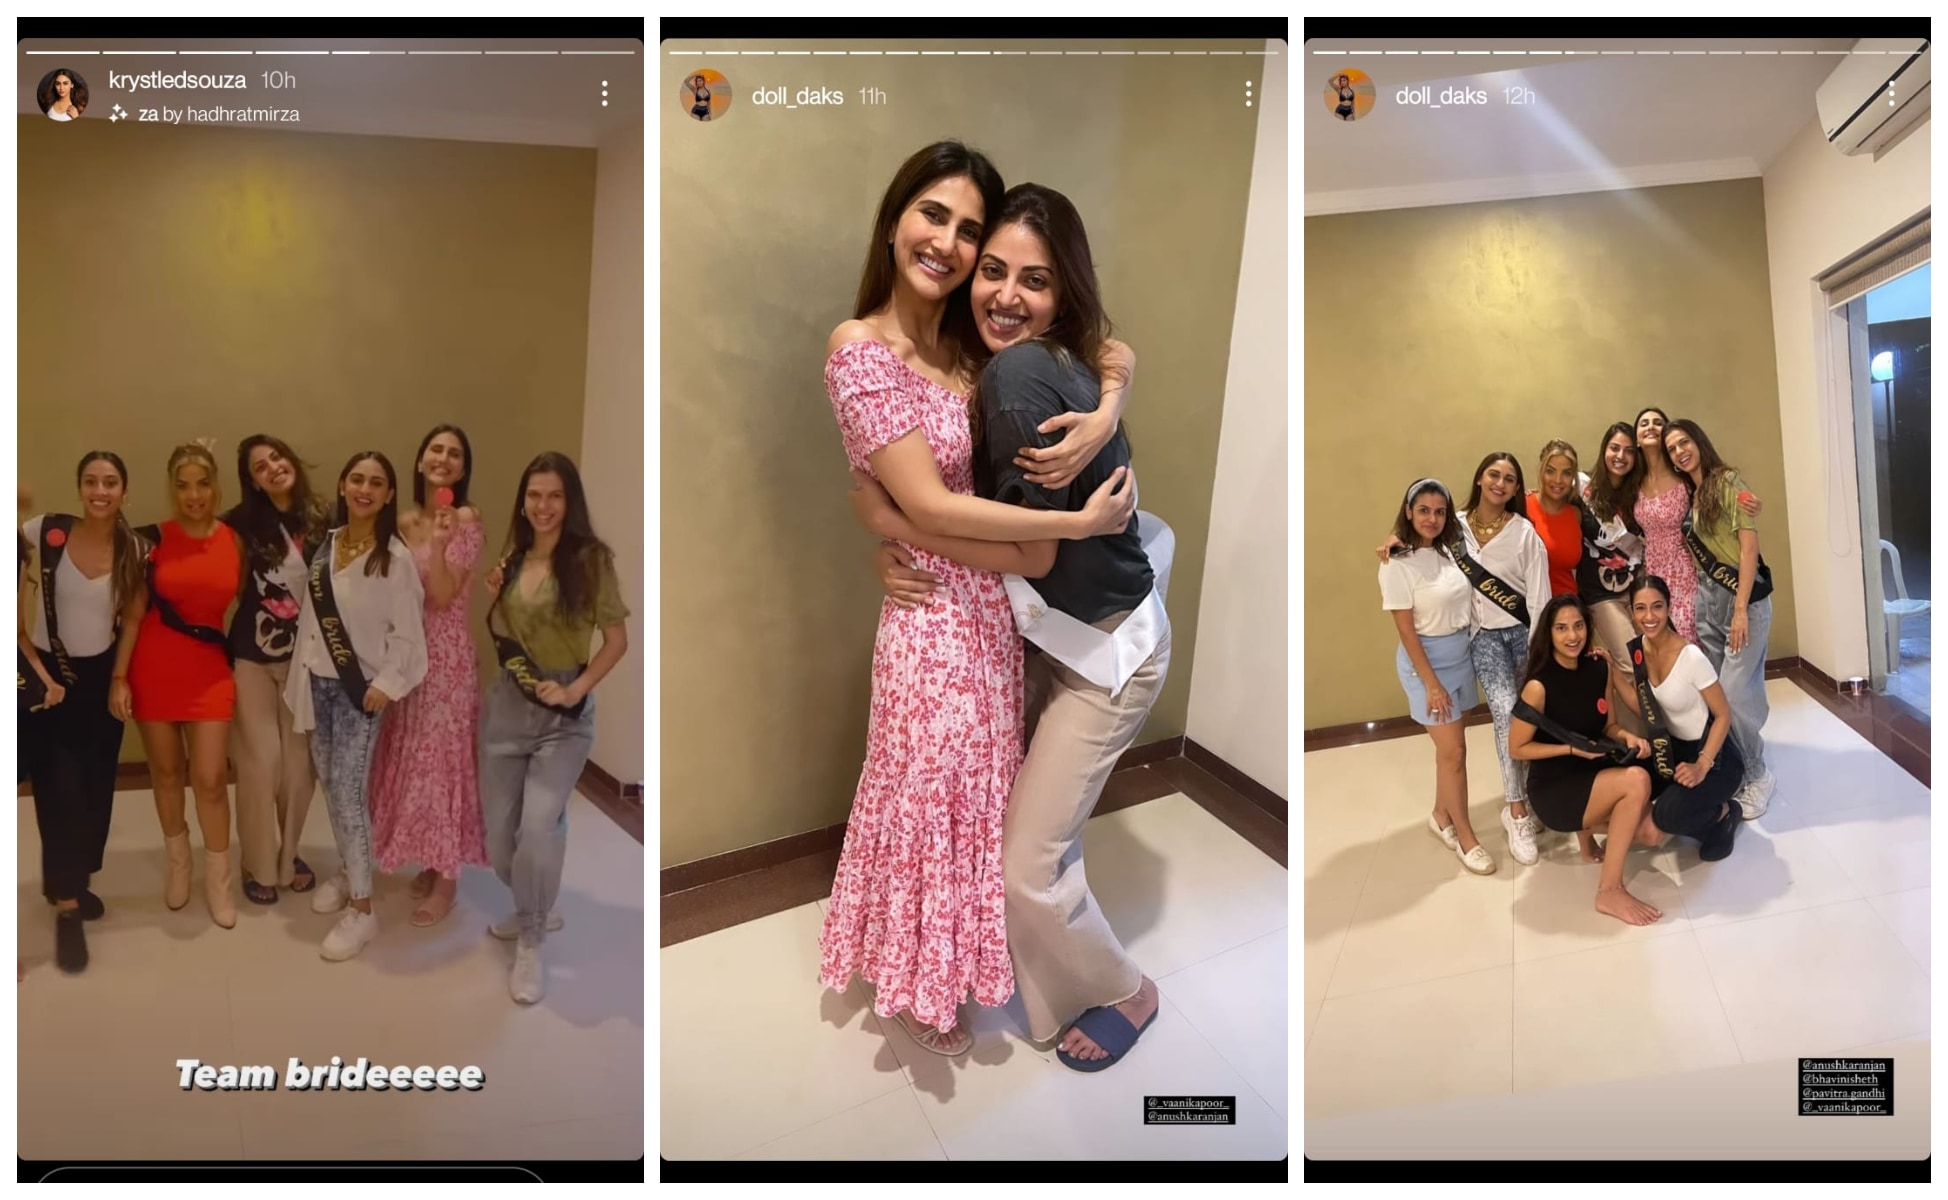 Vaani Kapoor hugged the bride-to-be in one of the photos.